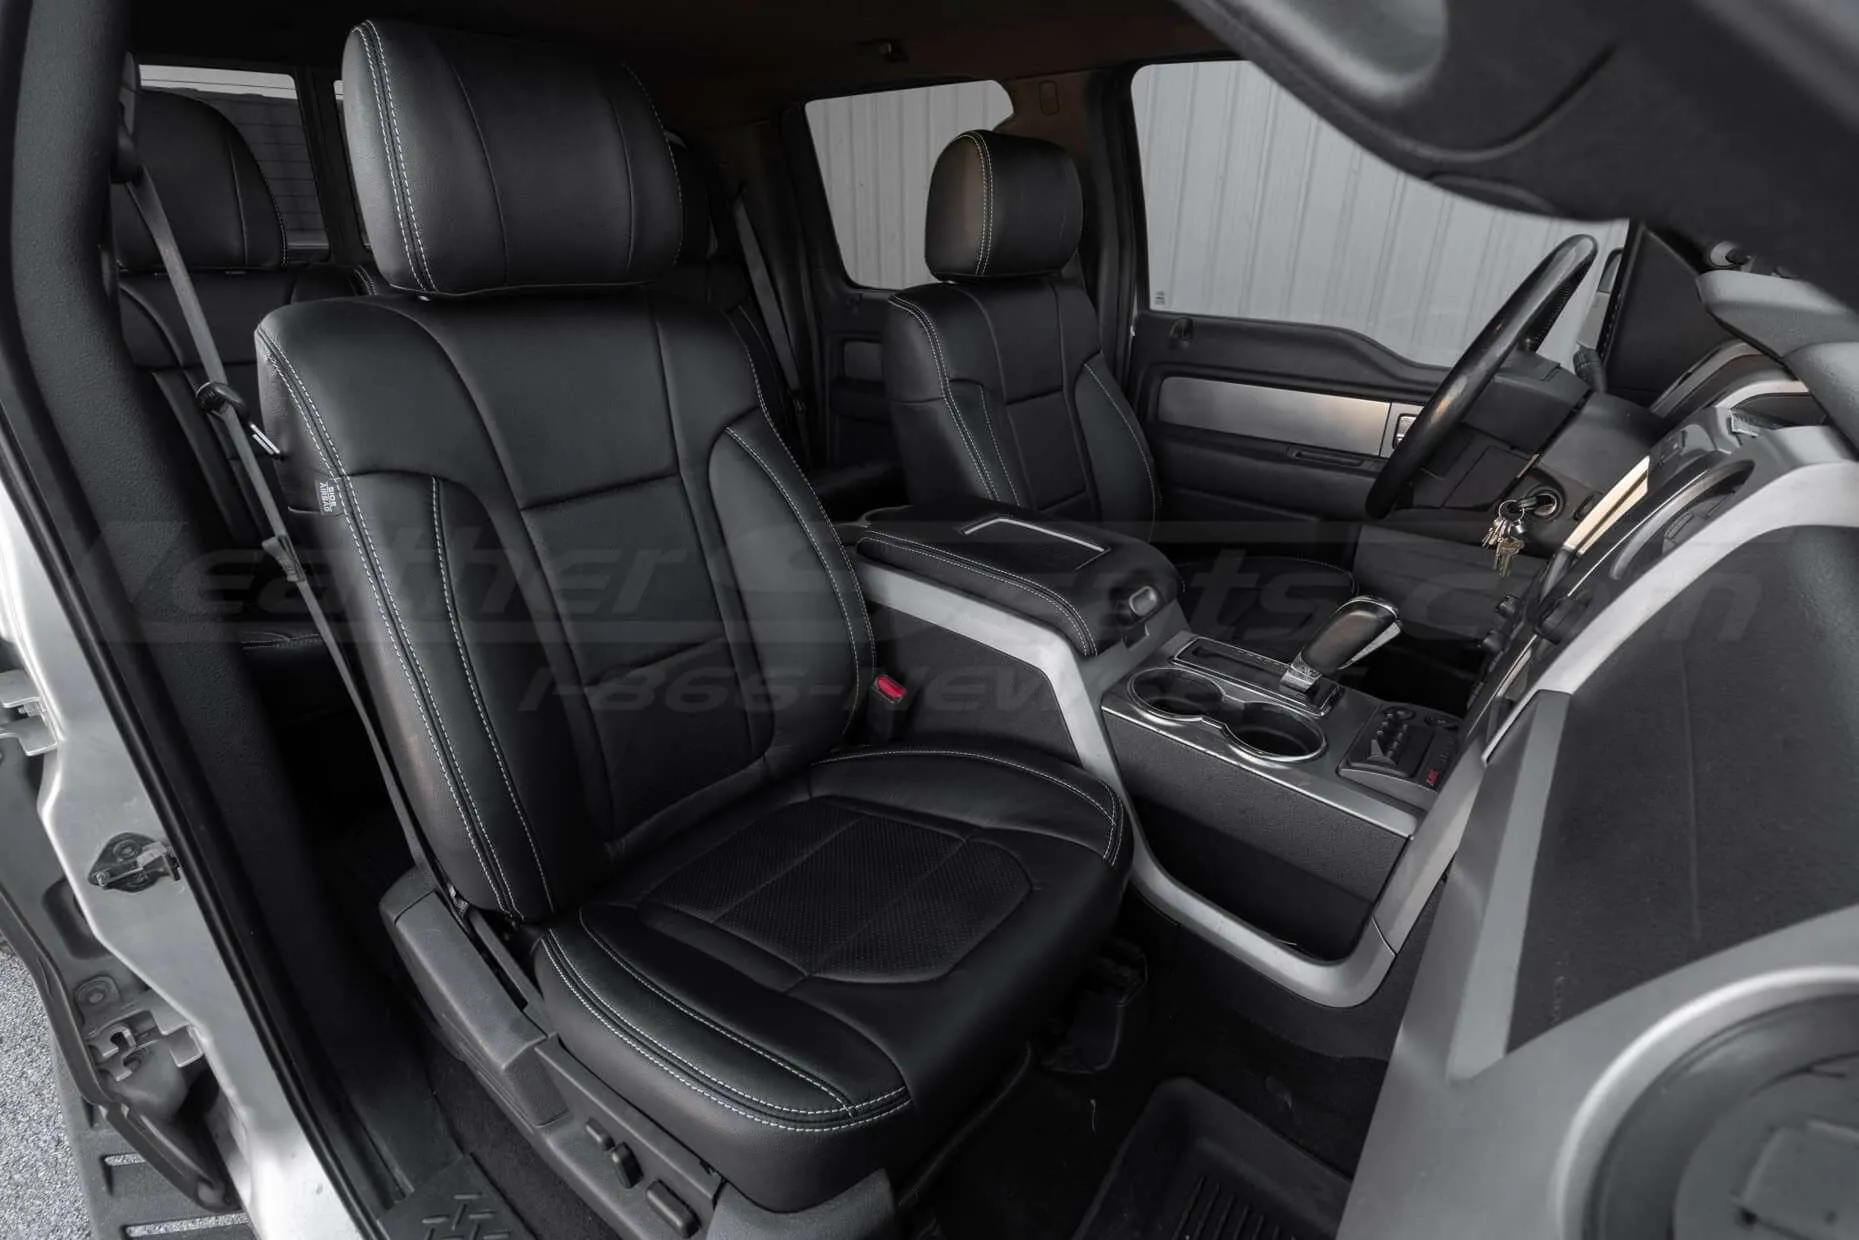 2012 Ford Raptor with Black leather seats and silver stitching - Front passenger